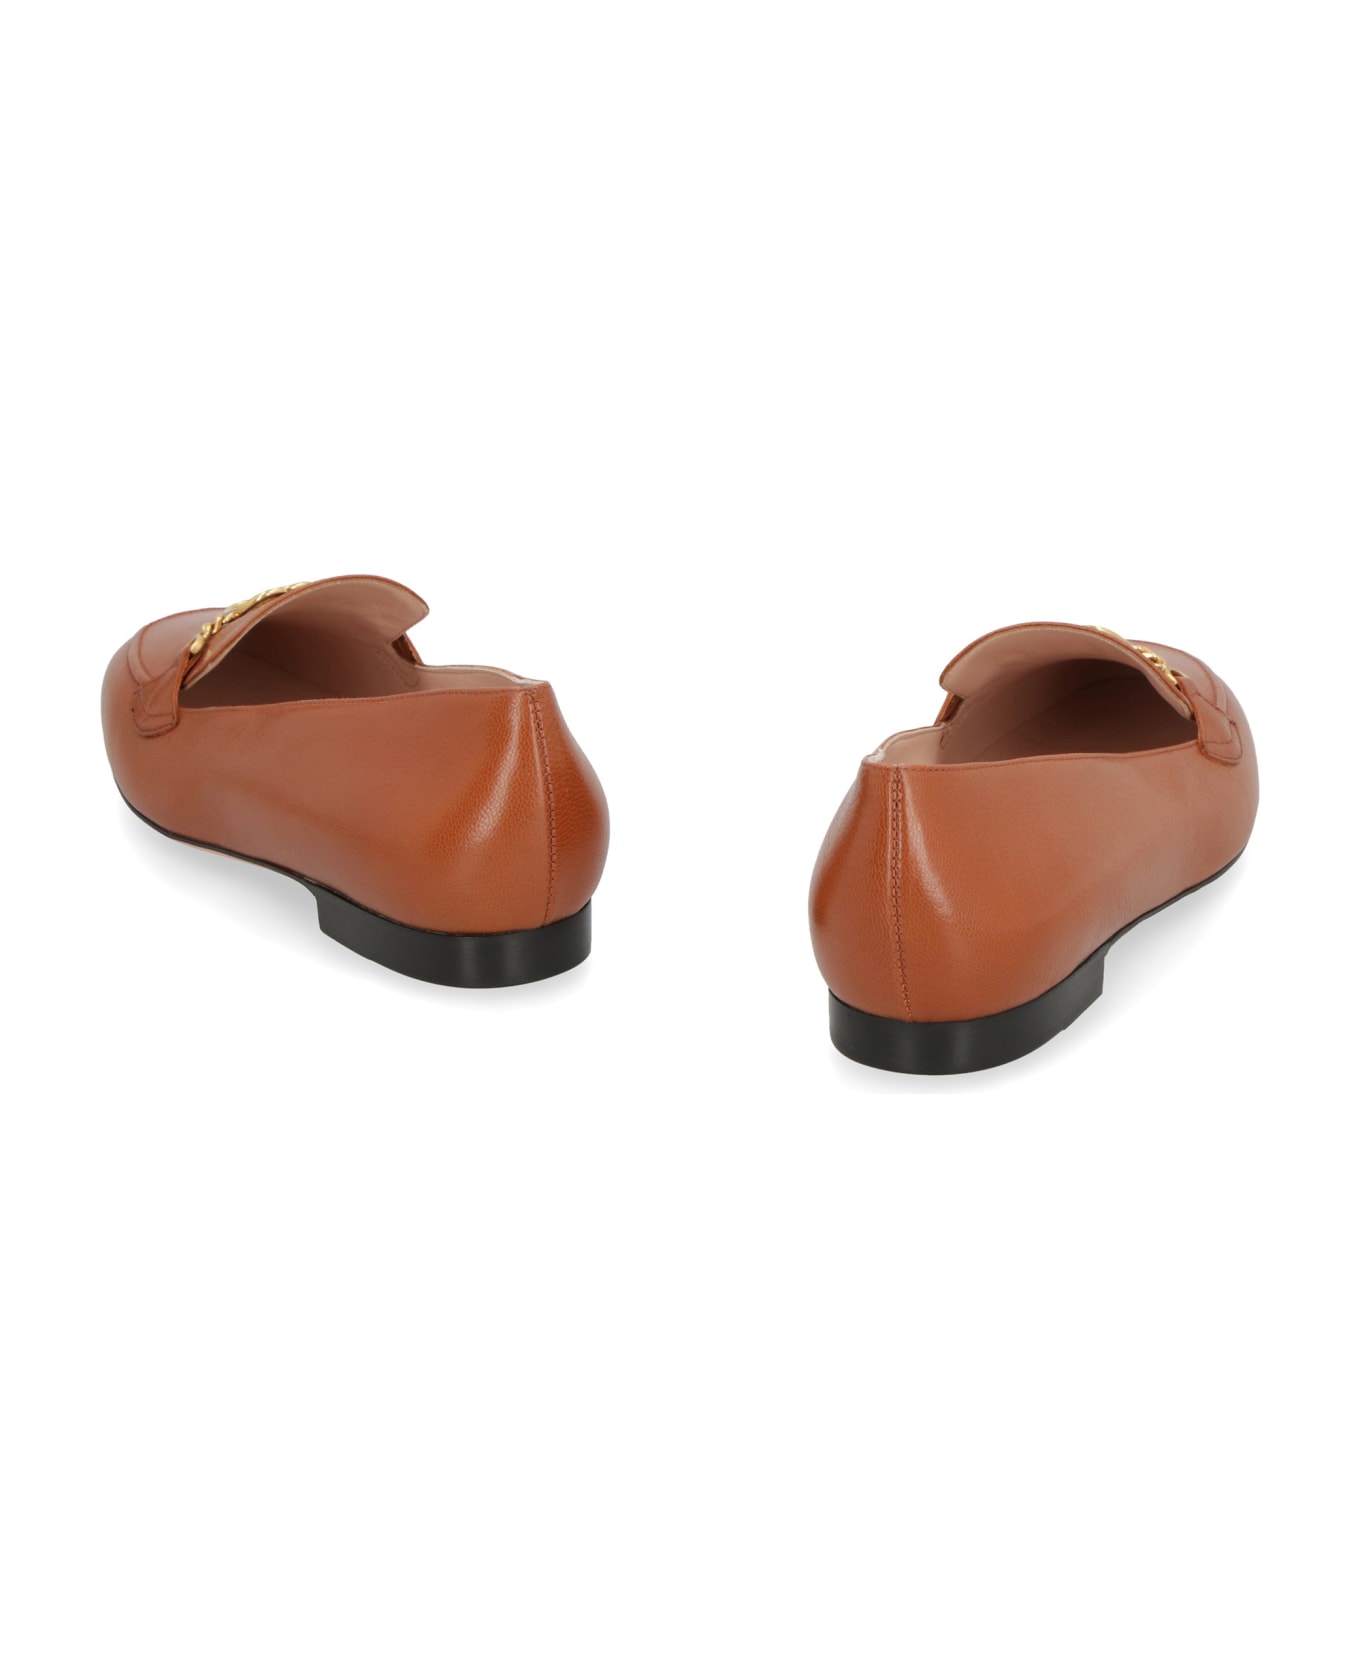 Bally Obrien Leather Loafers - brown フラットシューズ